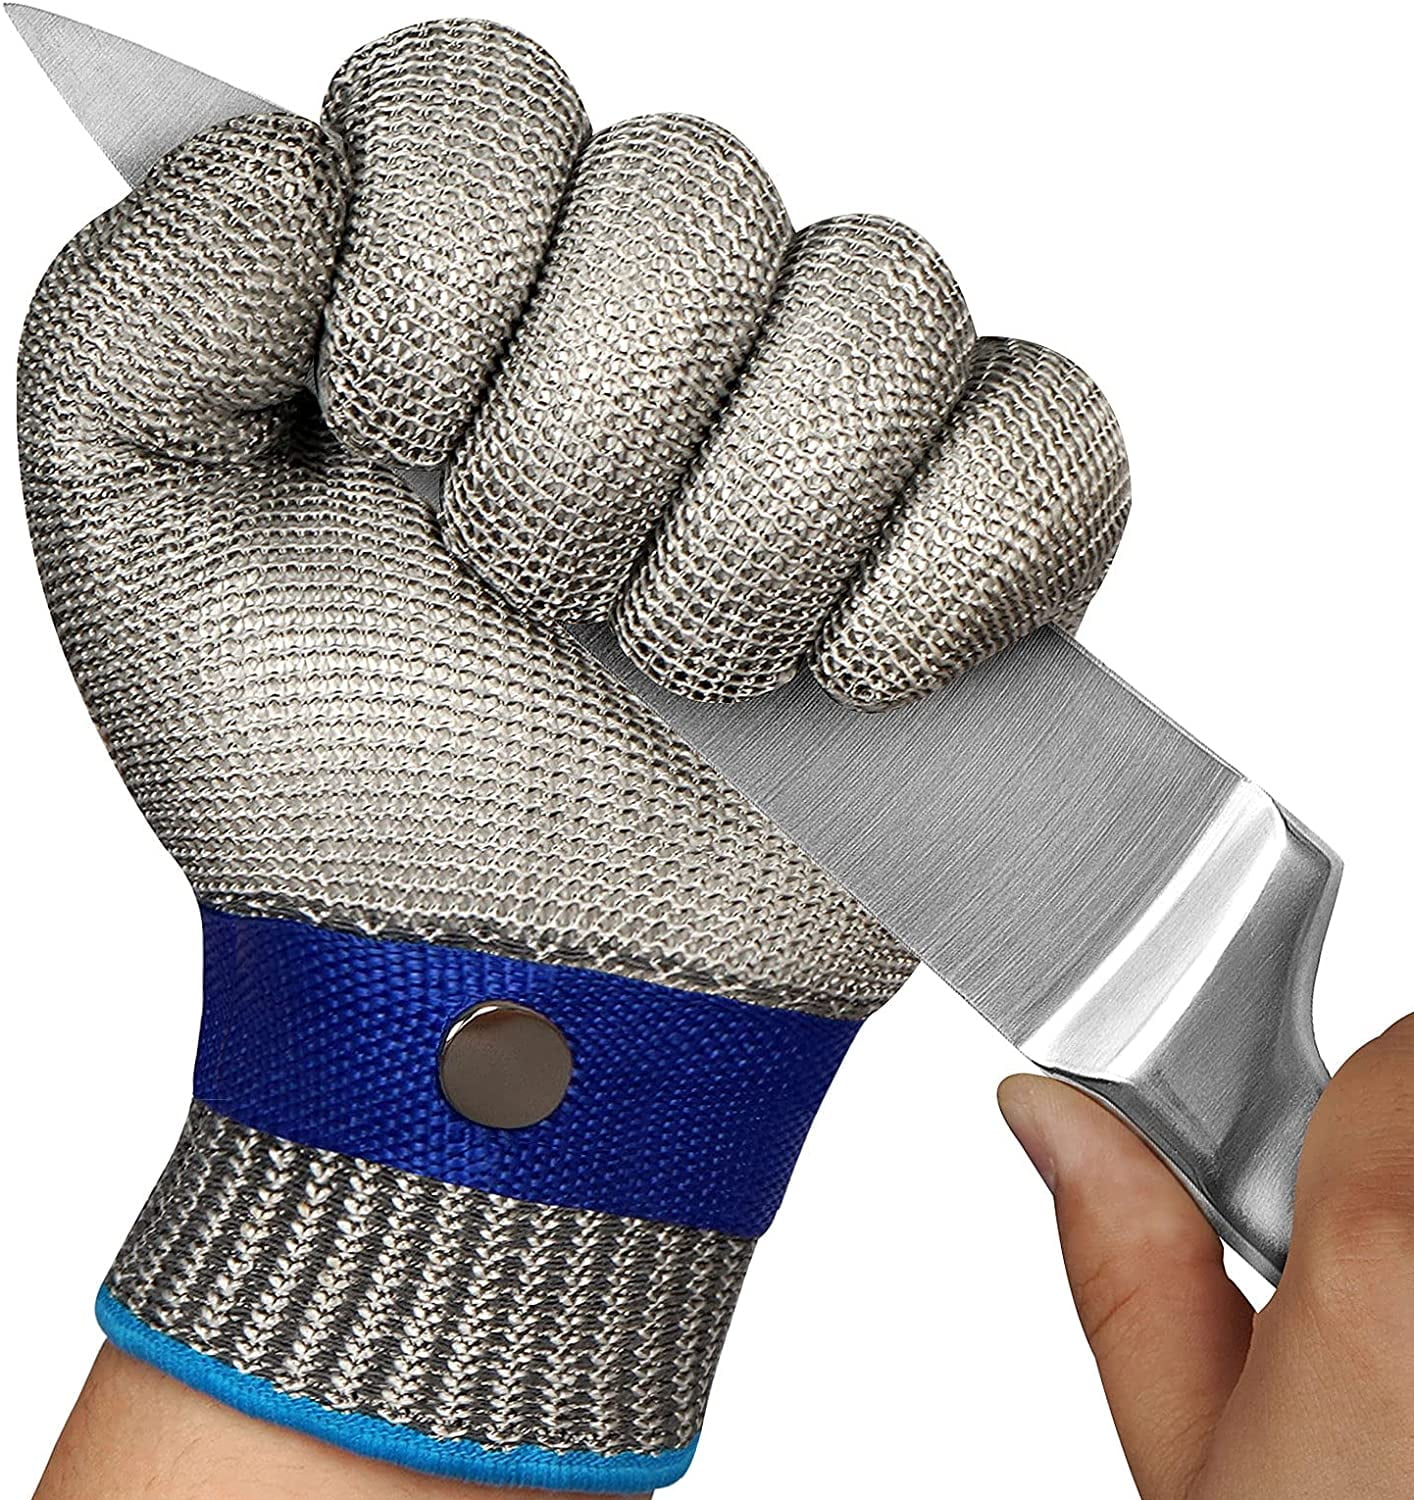 TCCFCCT Cut Resistant Gloves Level 9 Stainless Steel Wire Mesh Safety Work Glove